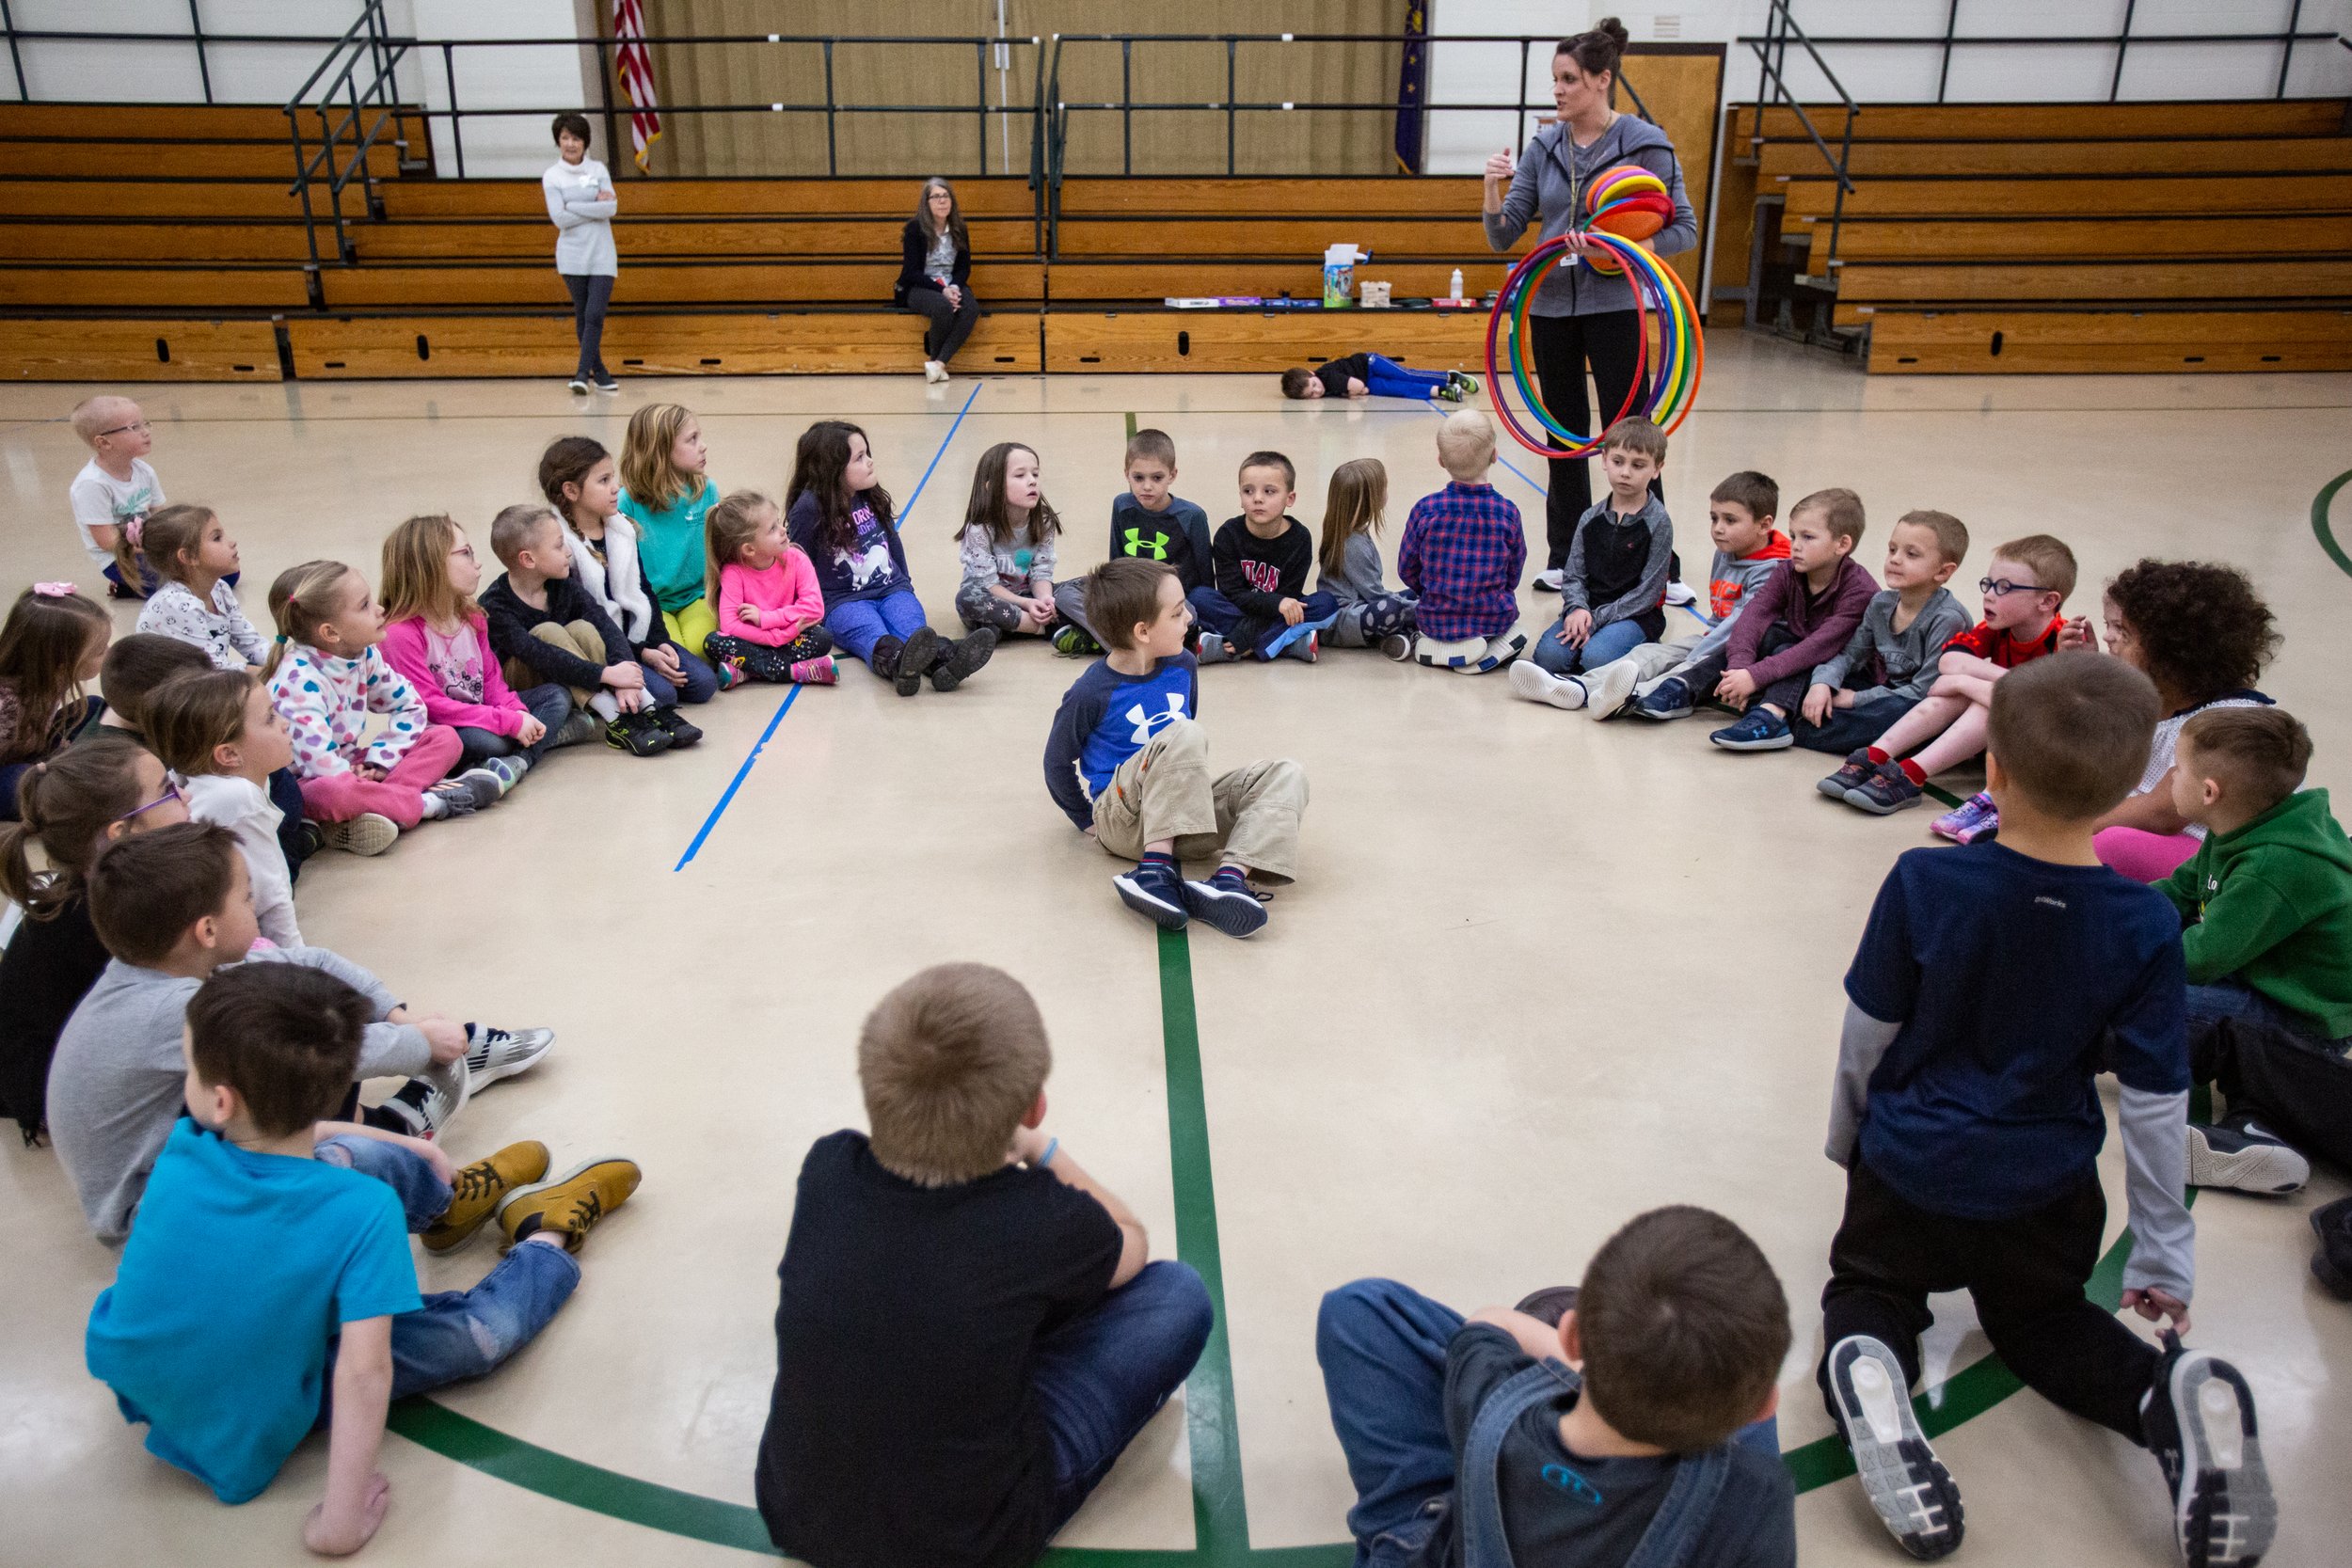  Kindergarten teacher Andi Longabaugh, top left, gathers the students together during gym class at Pine Ridge Elementary School on Wednesday, Feb. 12 2020. 